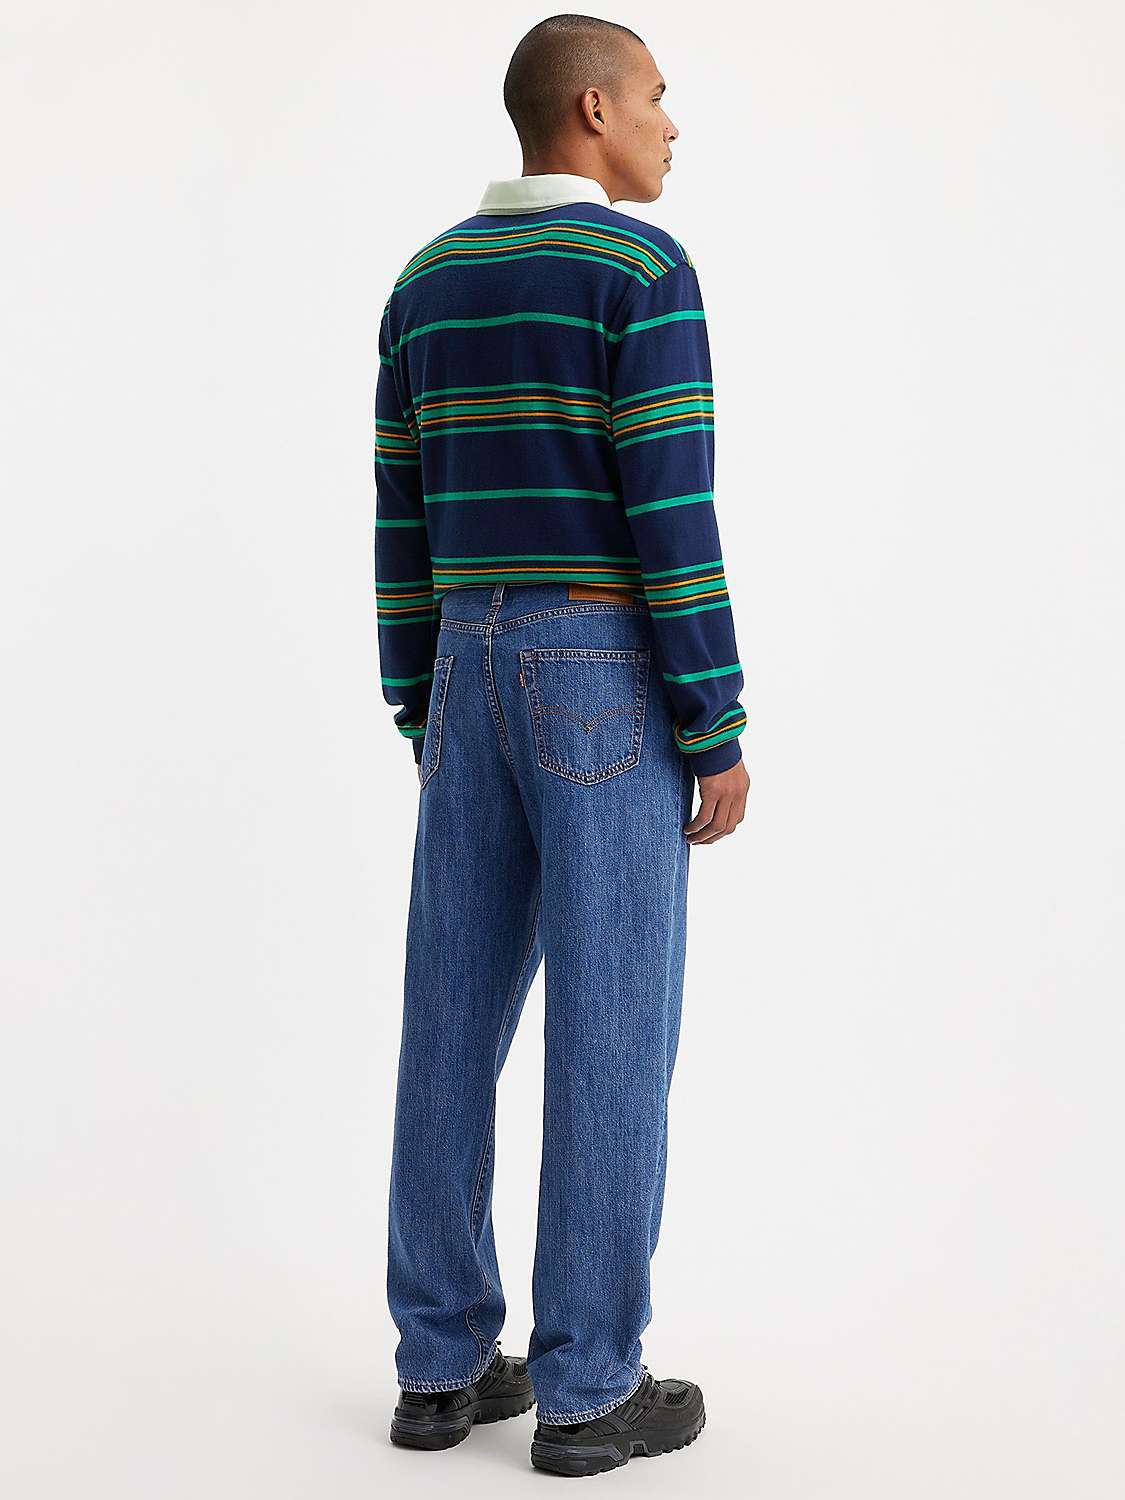 Buy Levi's 568 Stay Loose Jeans, Blue Online at johnlewis.com